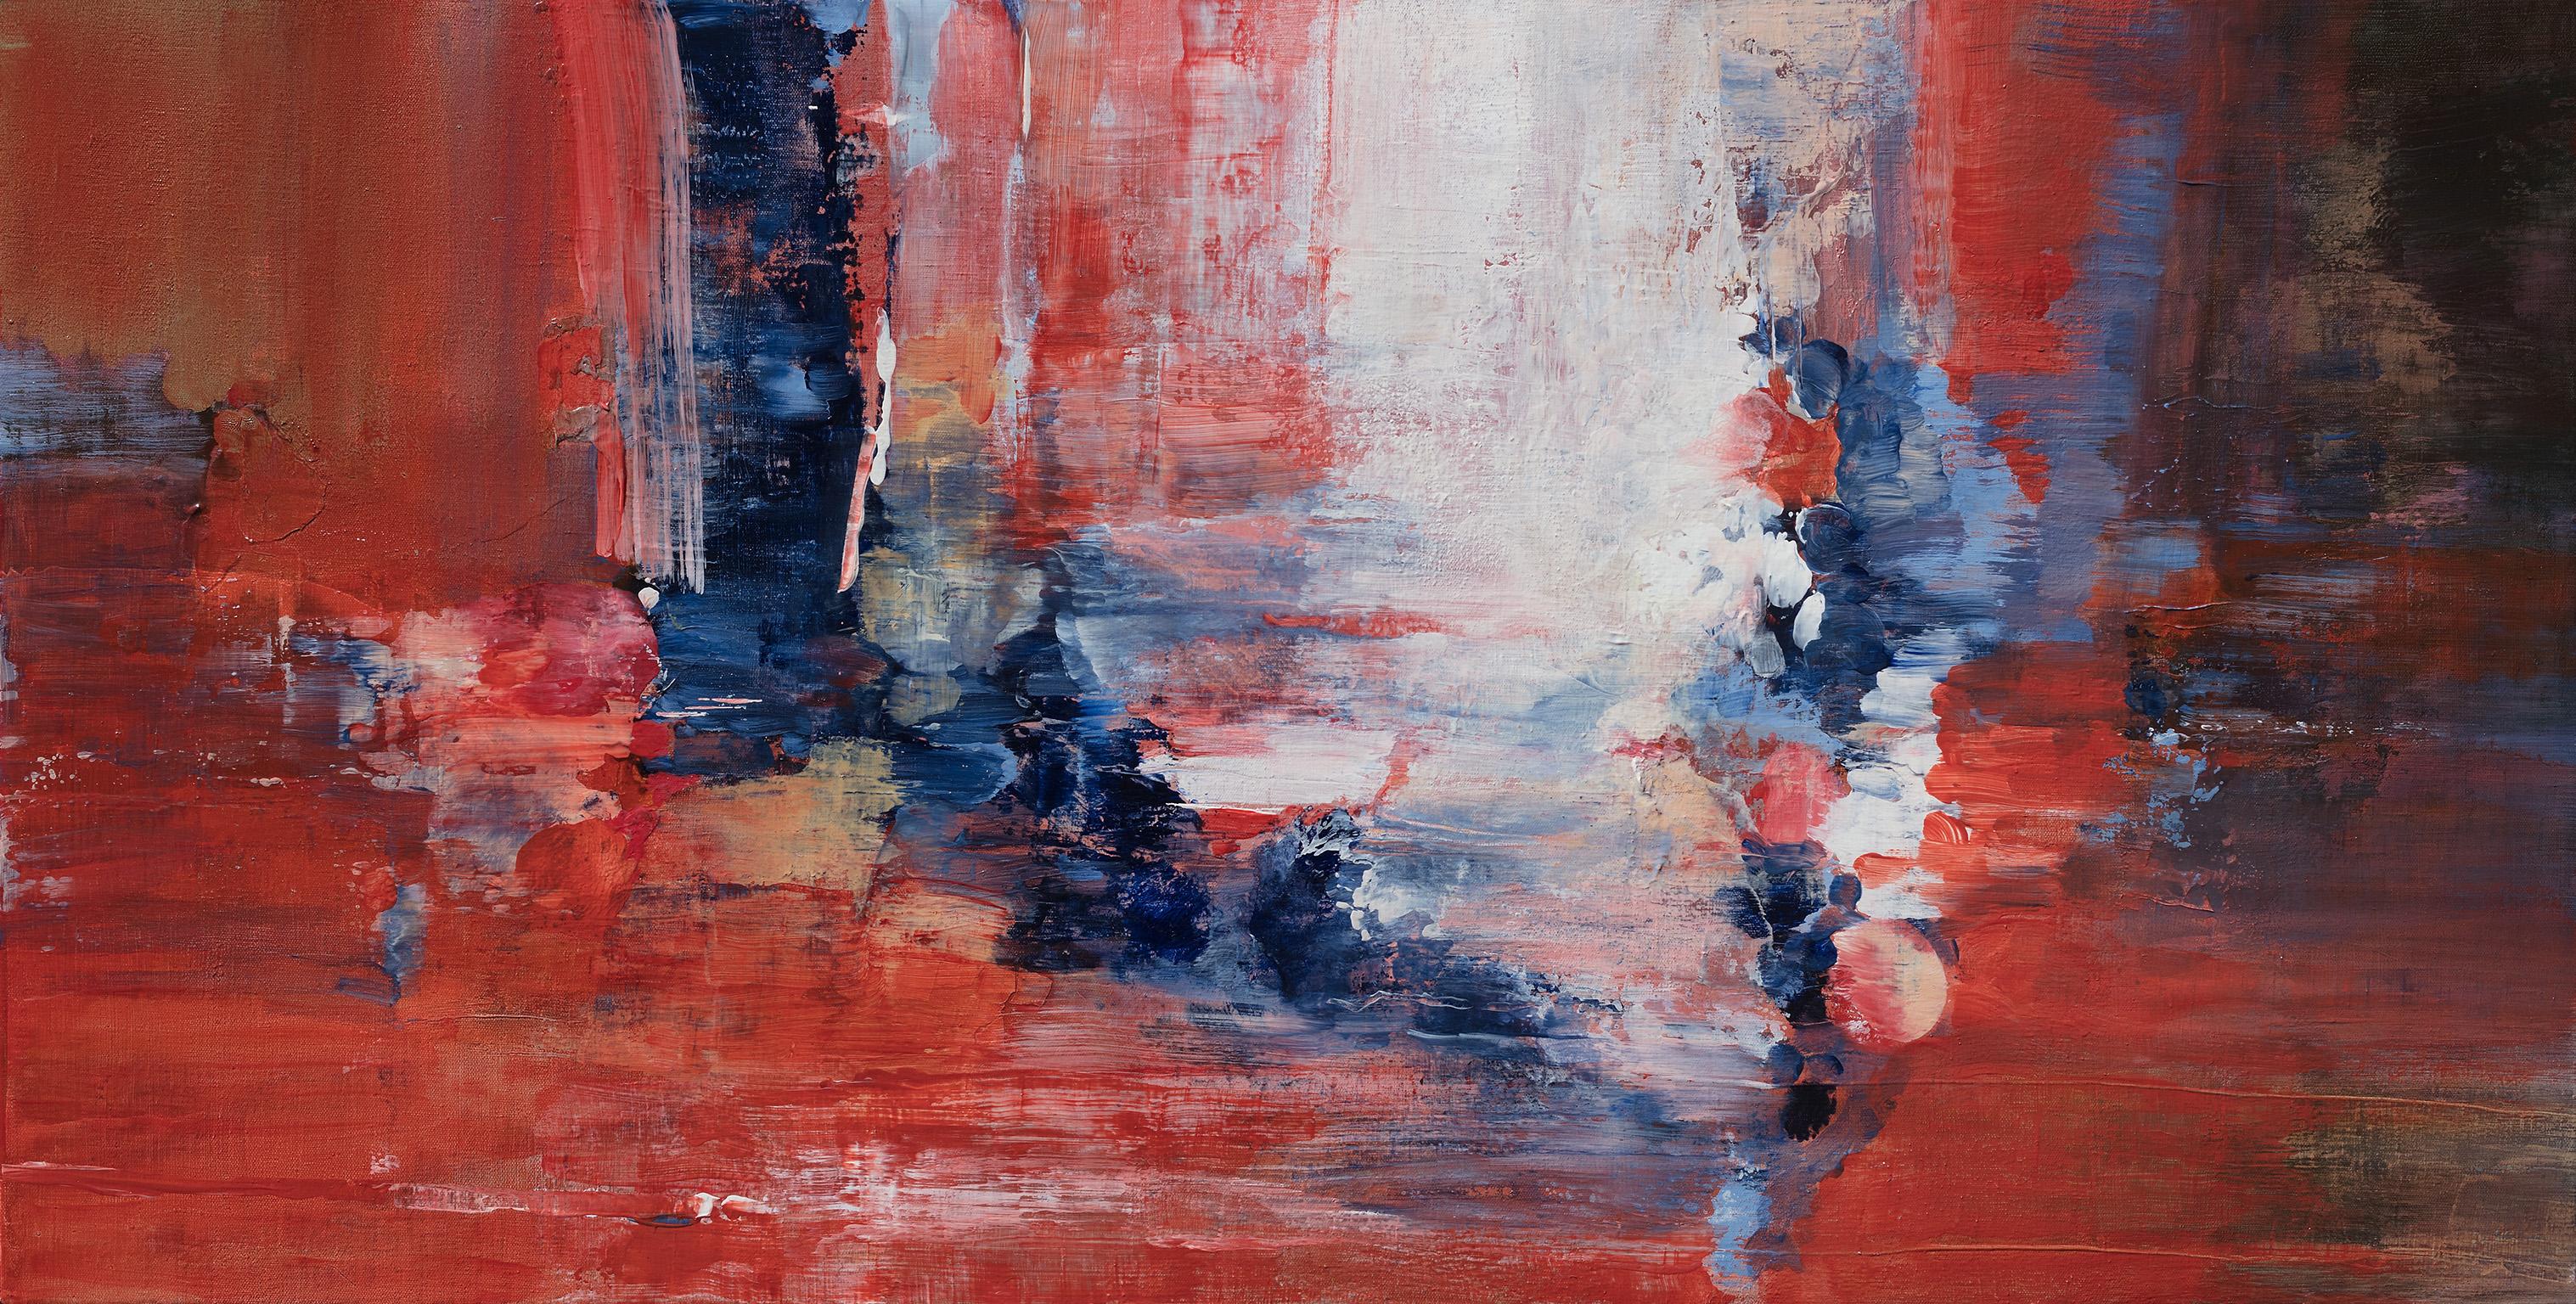 Rapid Response - Horizontal Abstract Landscape Painting in Red and Blue